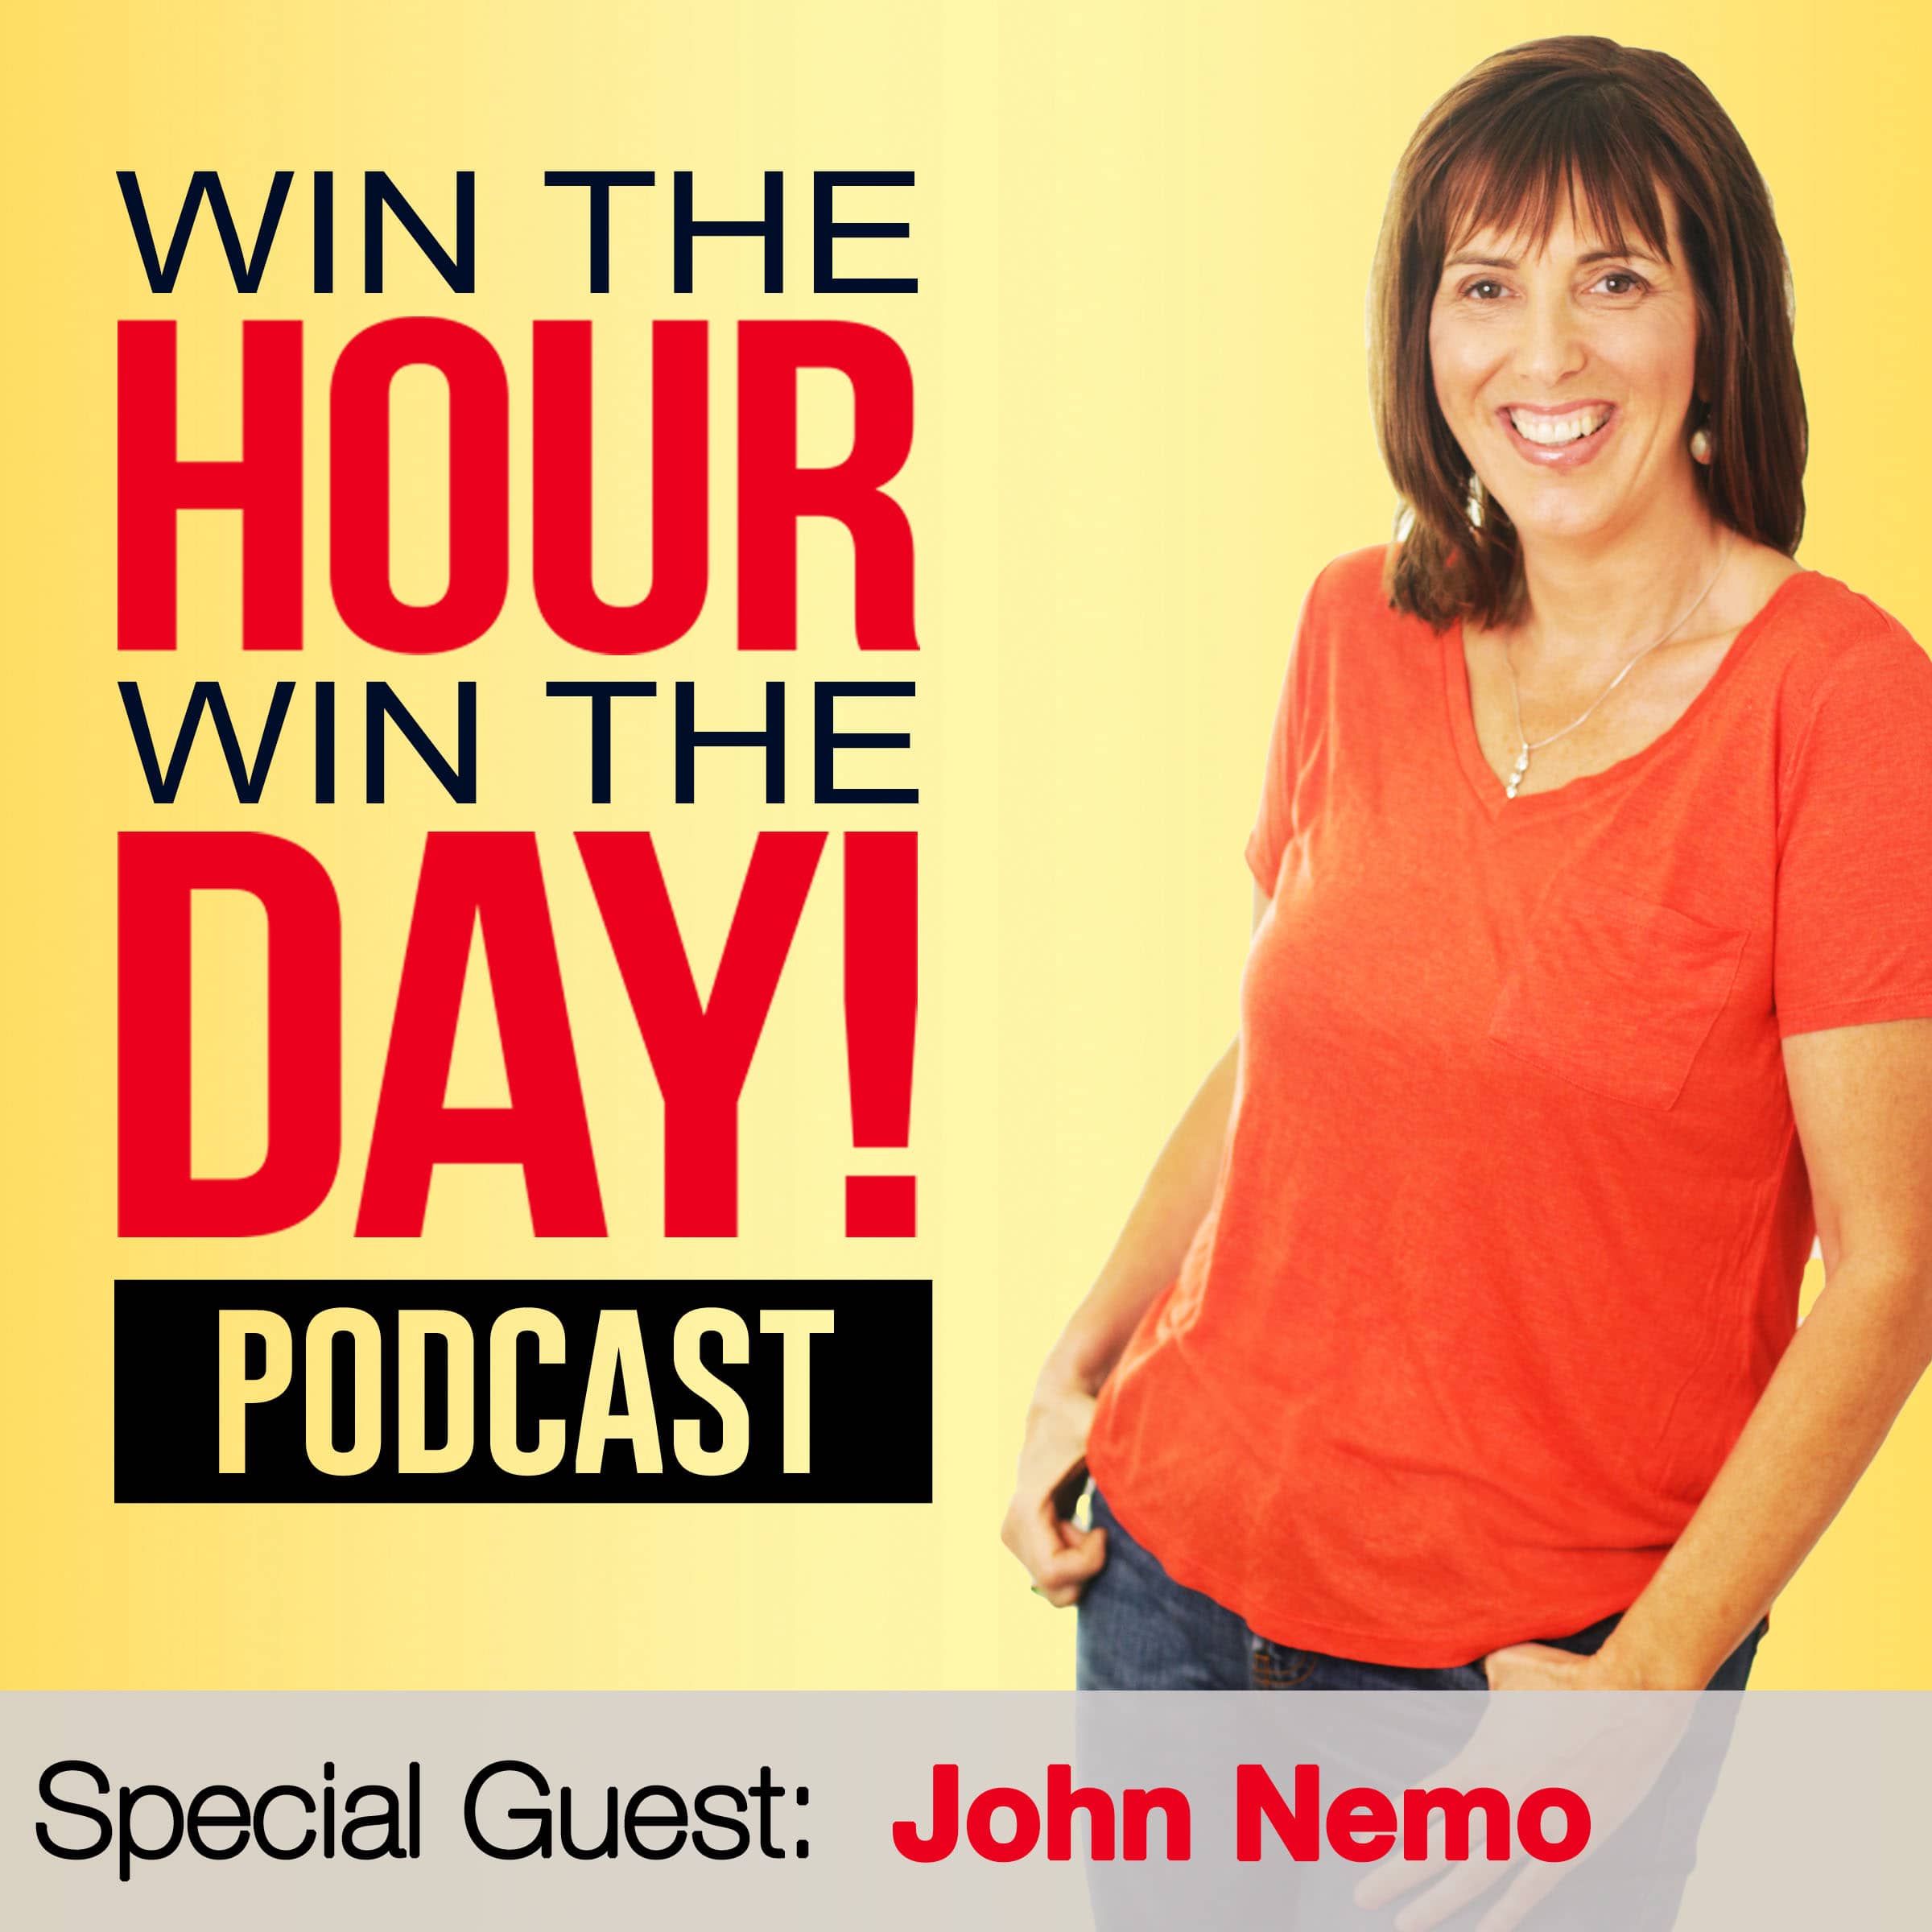 Being Professional On LinkedIn Is Hurting Businesses! With John Nemo